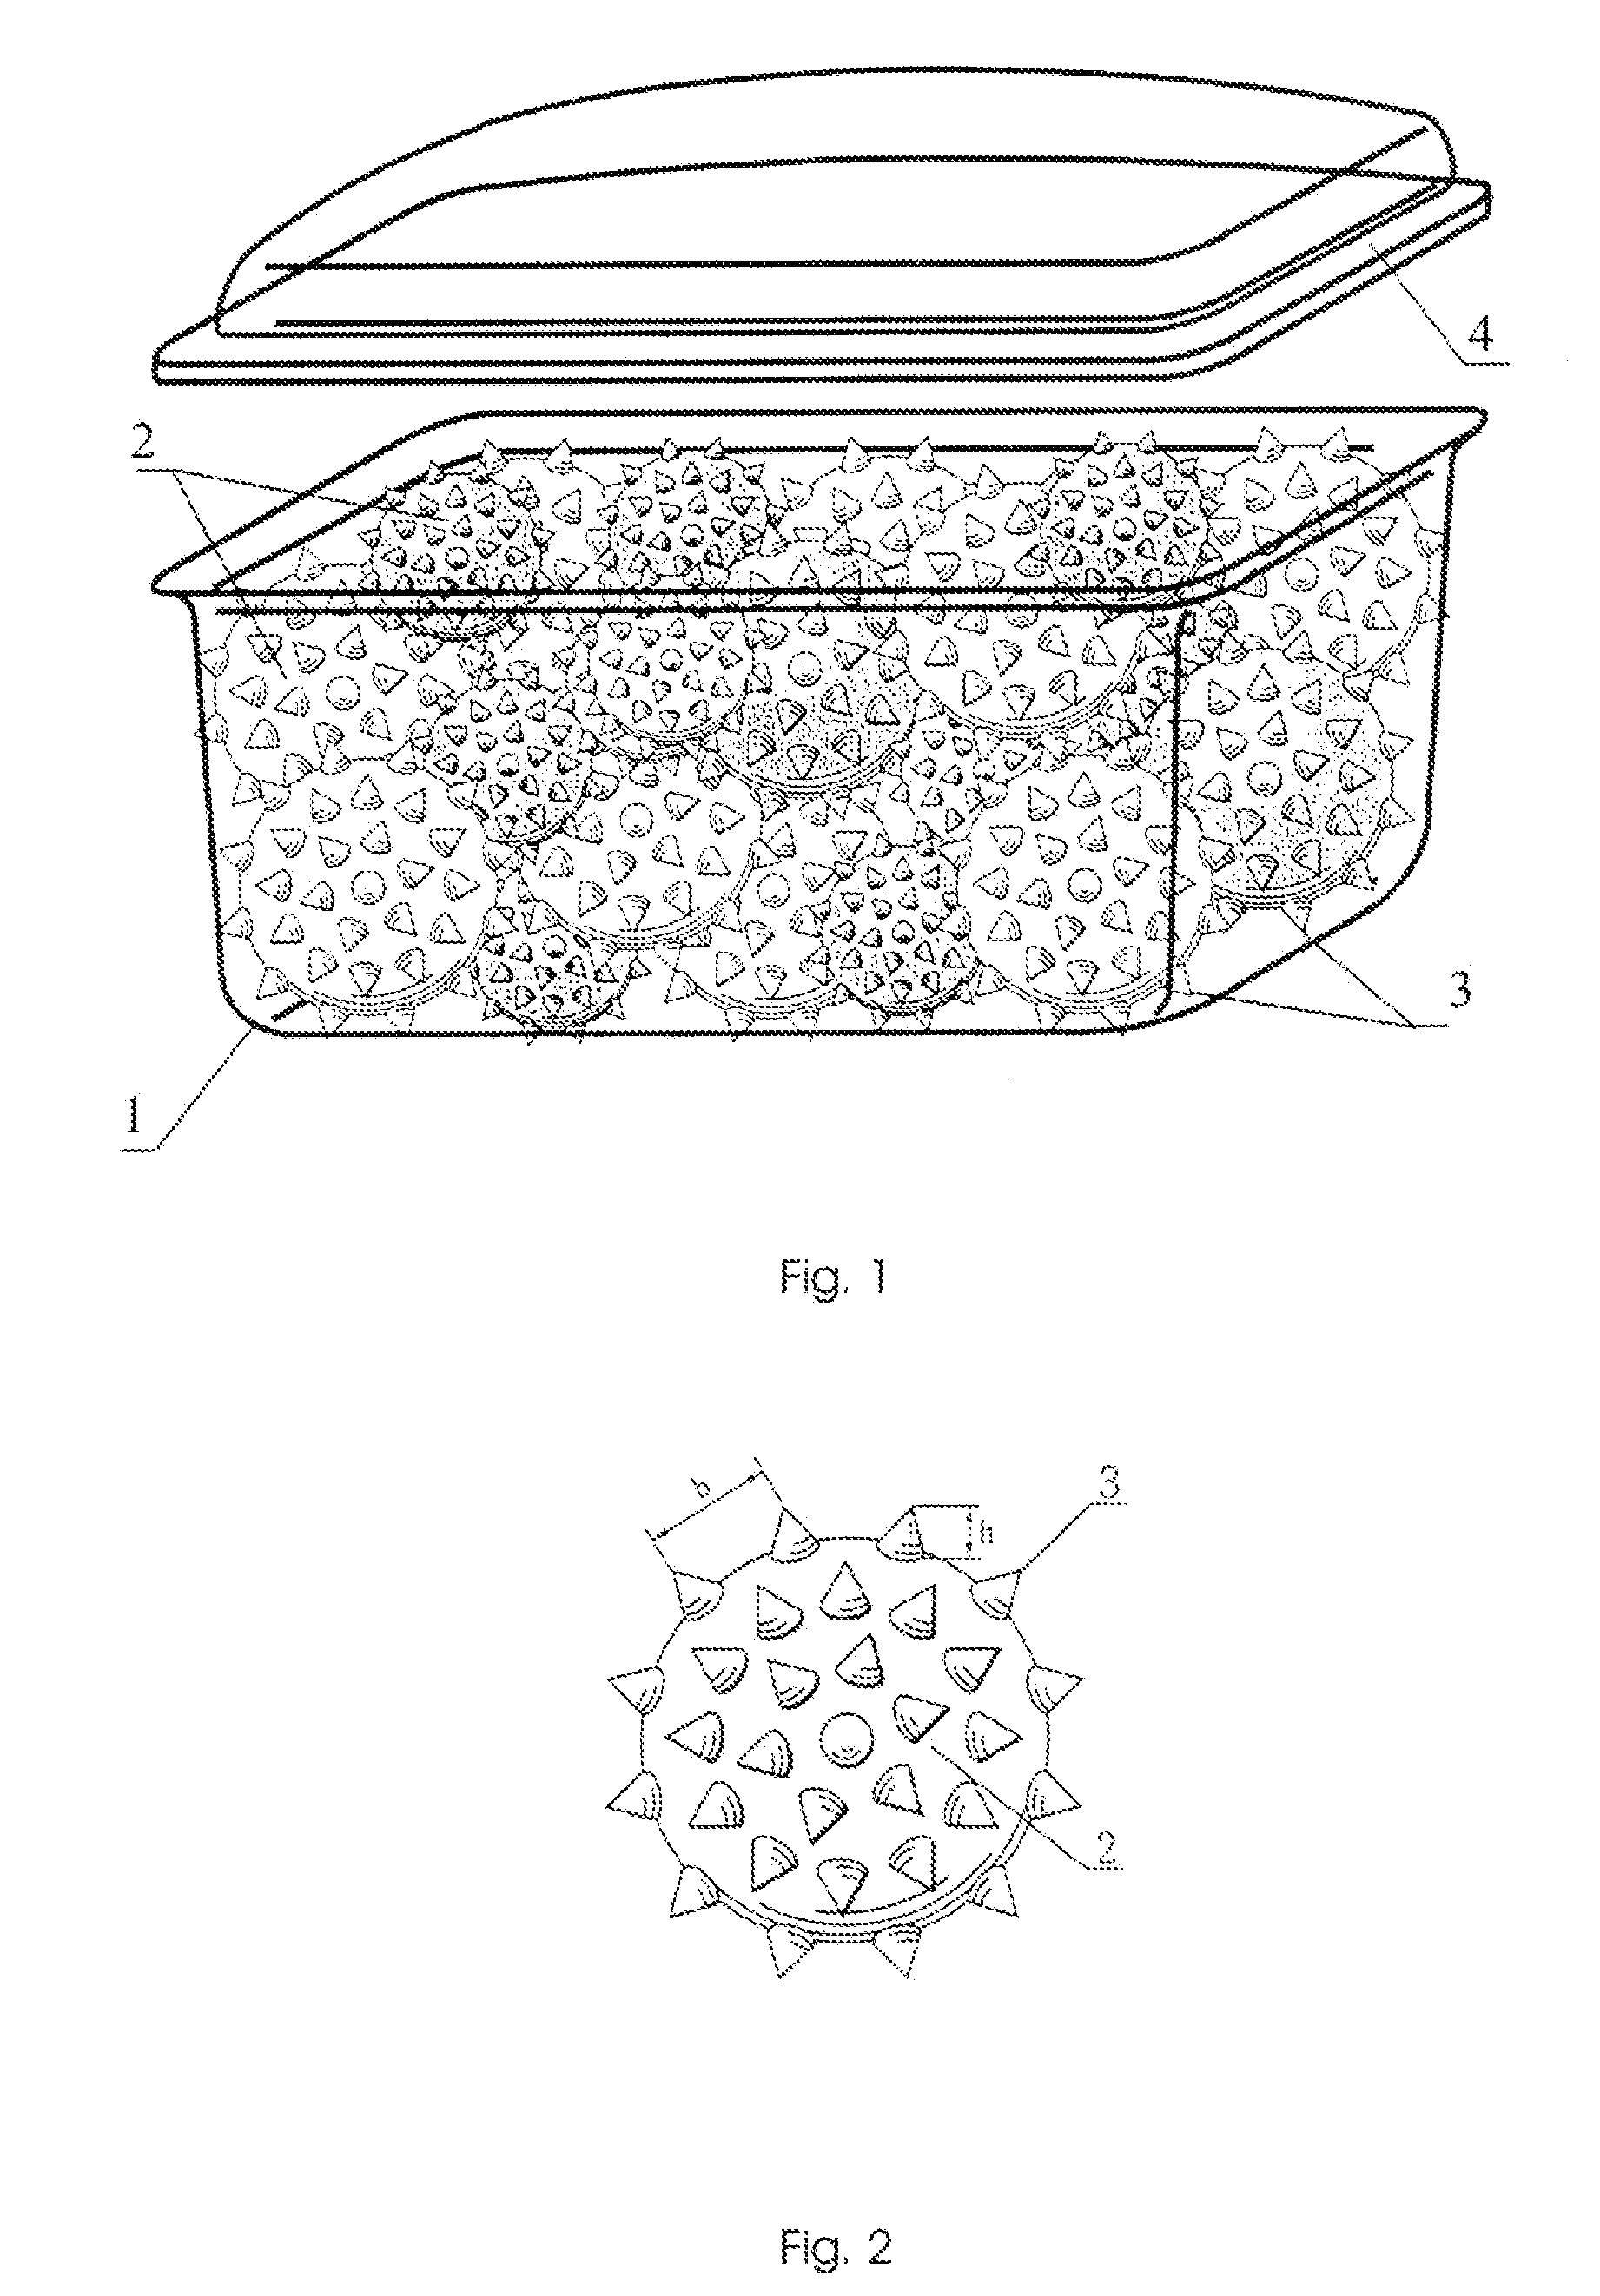 Apparatus and method for passive and active therapeutic exercise